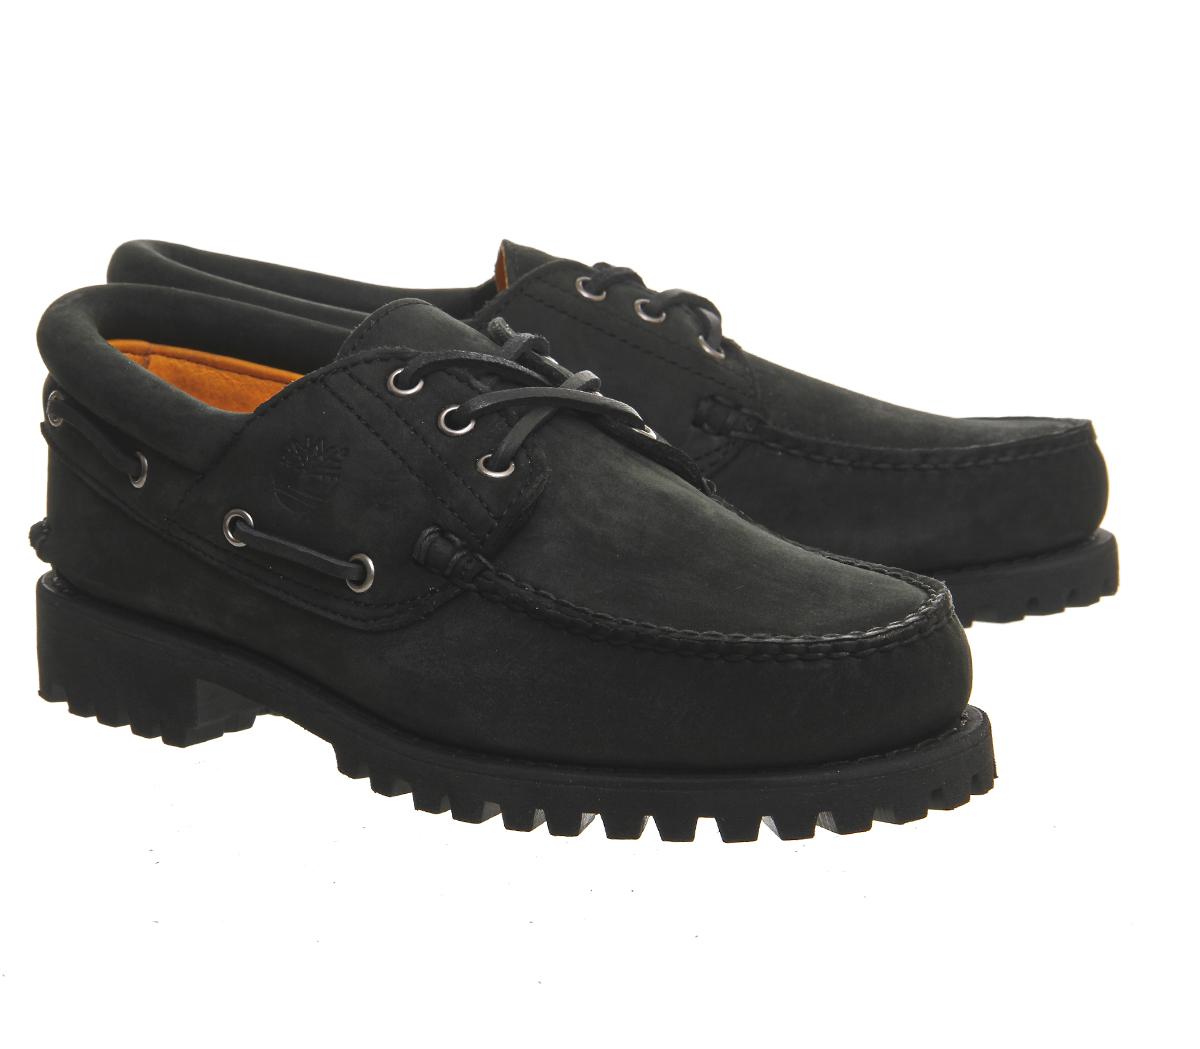 Timberland Leather 3 Eye Classic Lug Boat Shoes in Black for Men - Lyst